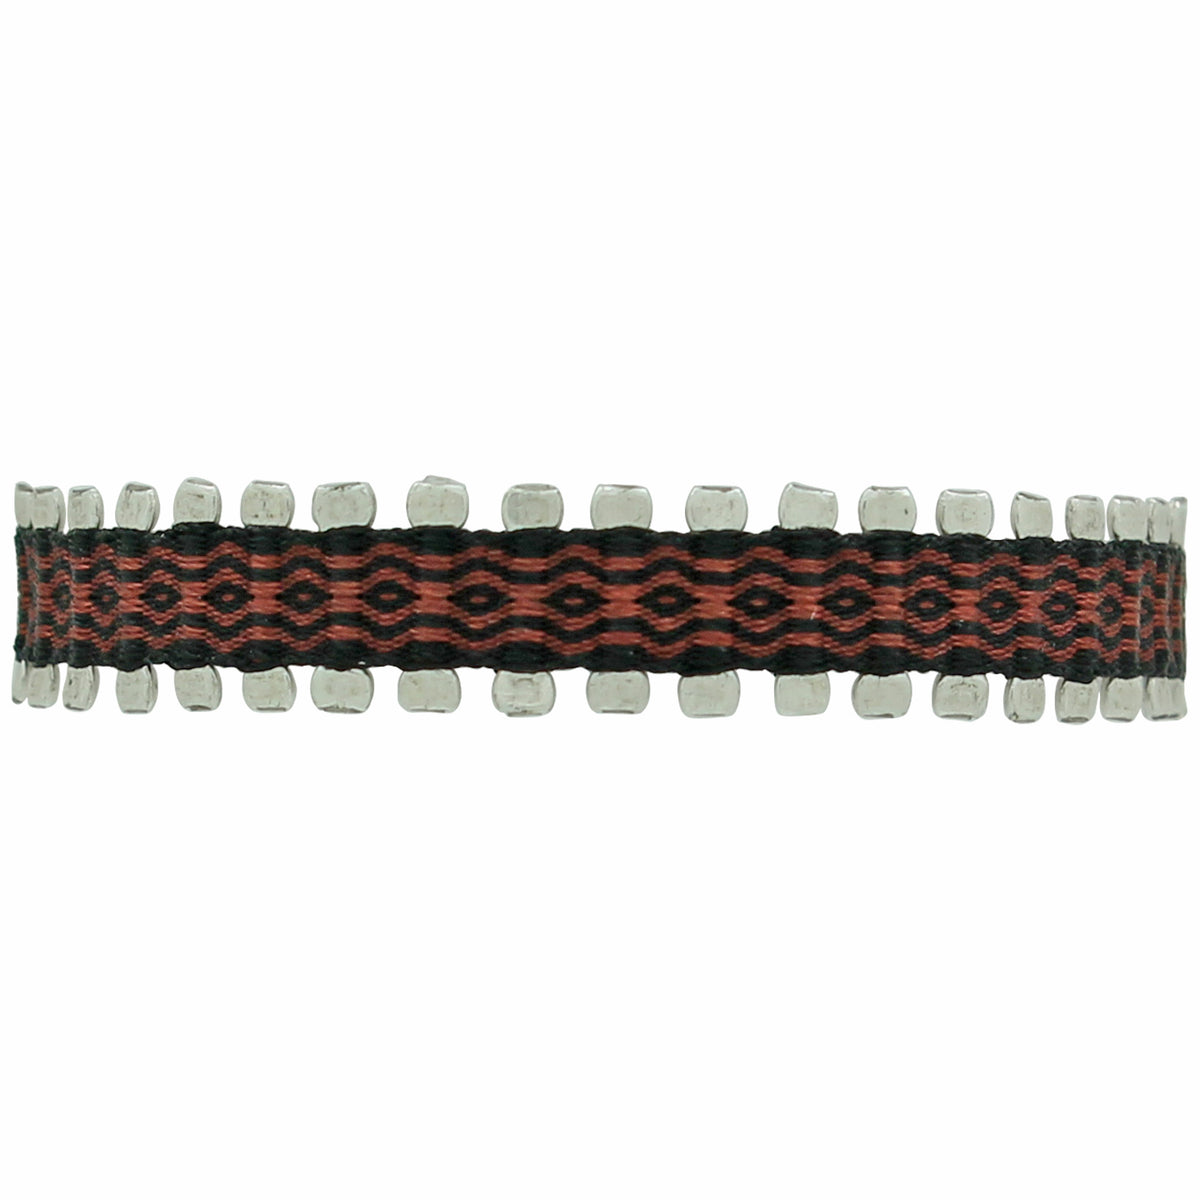 HANDWOVEN PIN BRACELET IN DARK RED AND BLACK COLORS FOR HIM